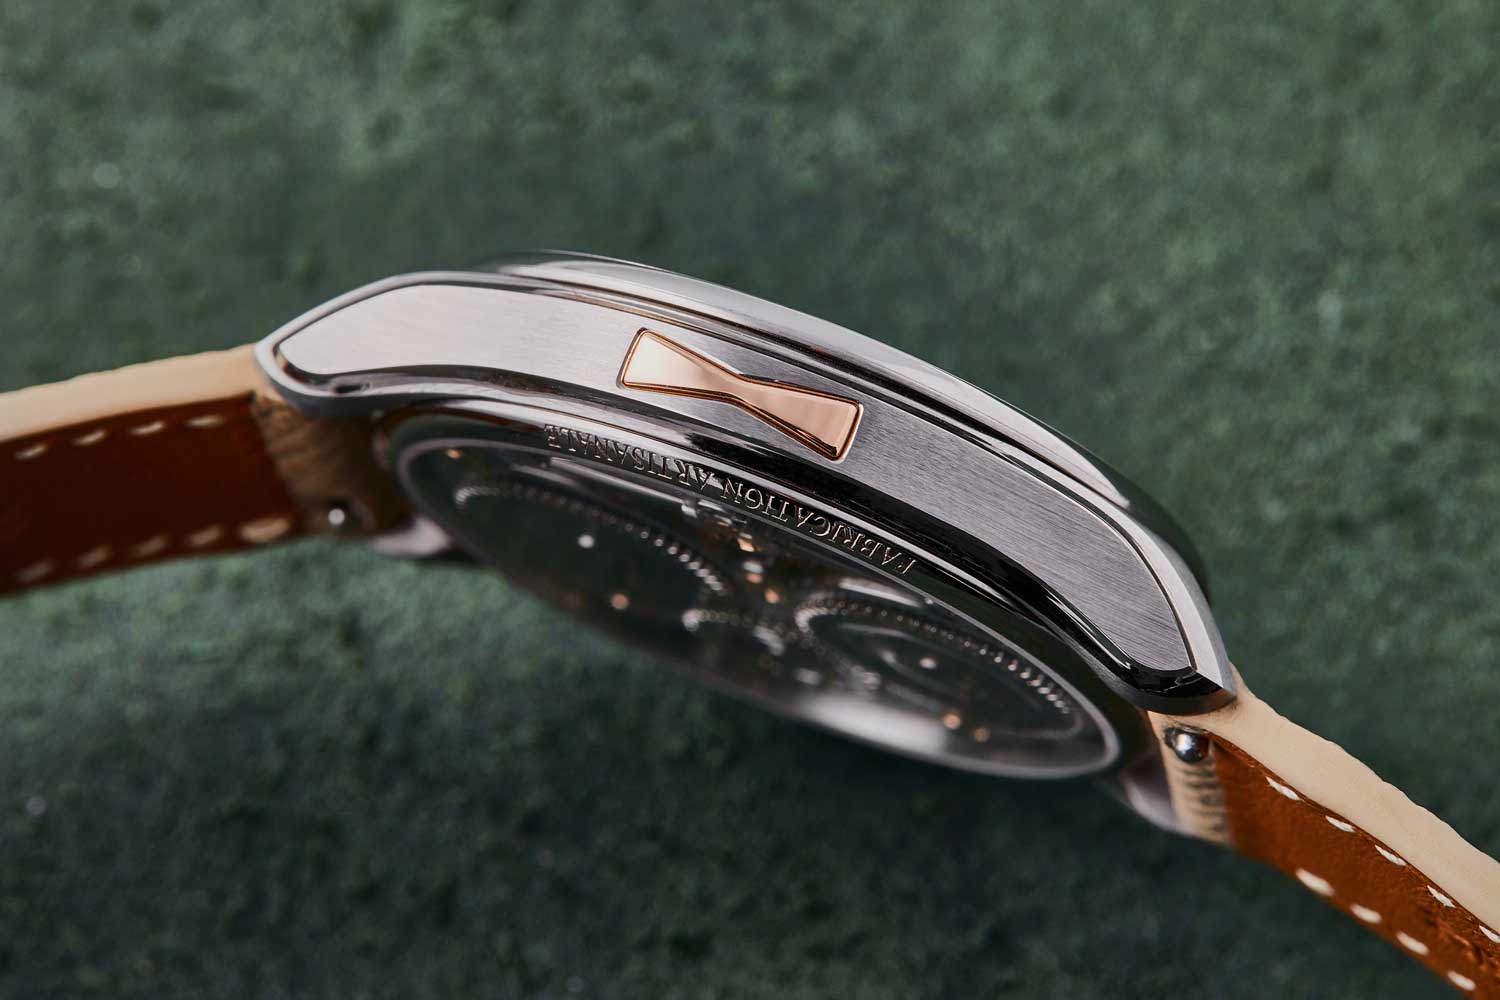 In a tribute to his carpenter father, a rose gold dovetail insert that resembles the joint his father often used in his carpentry work is embedded in the left side of the caseband